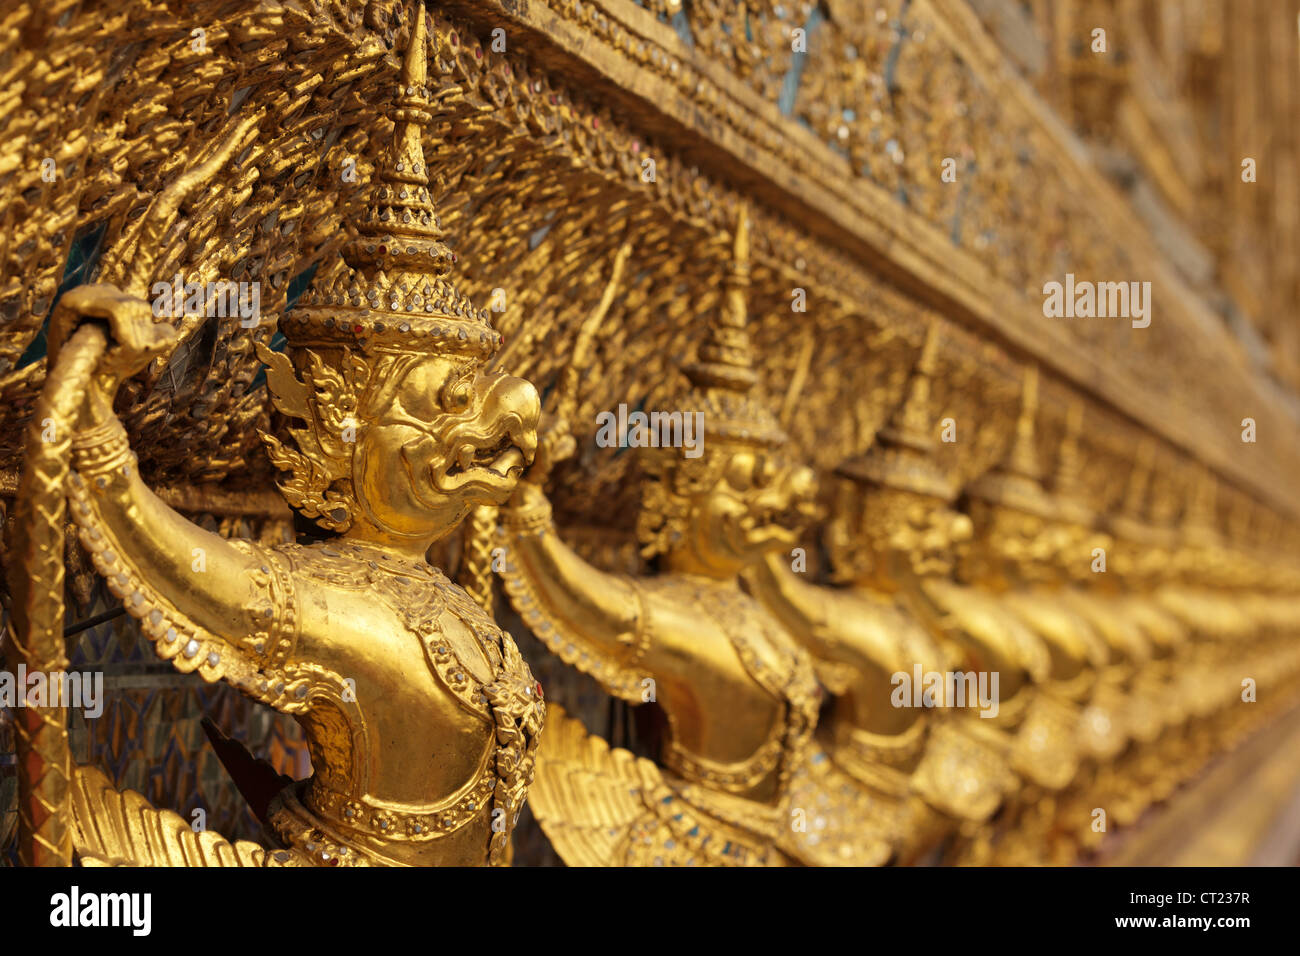 perspective view of golden religious statue in wat phra kaeo temple, Bangkok, Thailand, shallow depth of field Stock Photo